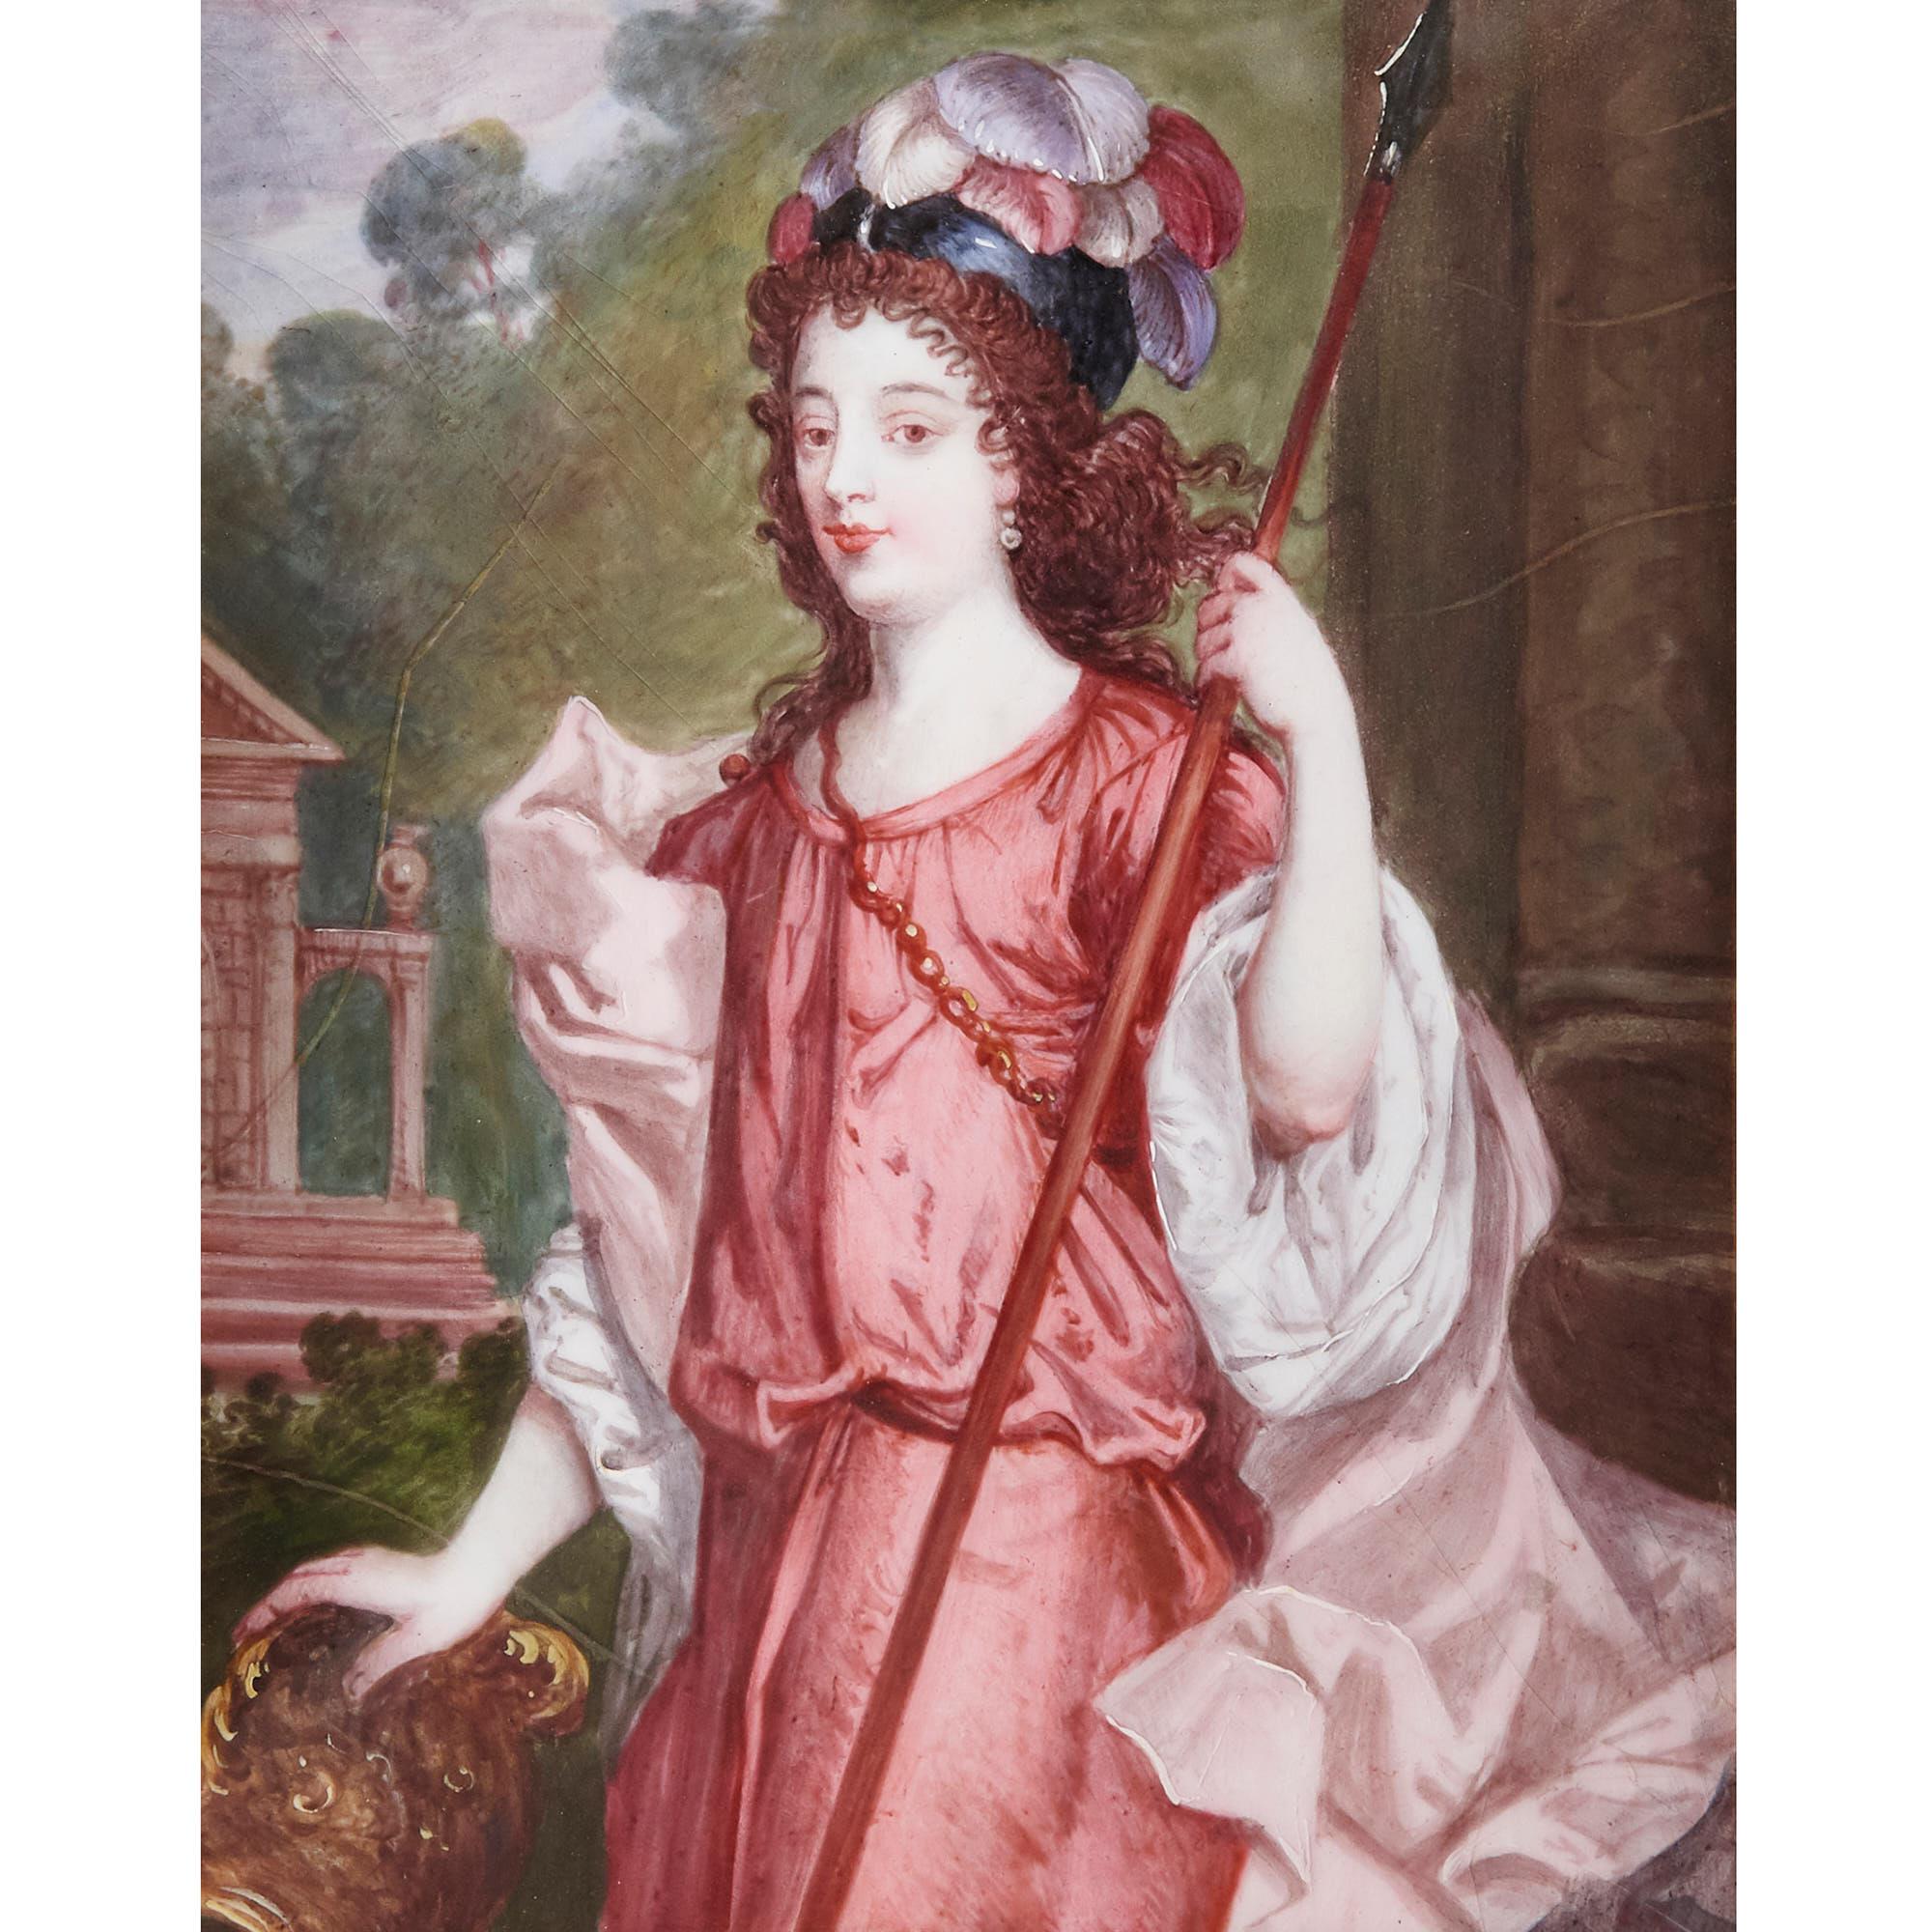 'Duchesse de Richmond' French Limoges enamel portrait plaque
French 19th century
Height 22cm, width 16cm, depth 2cm

This exquisite Limoges enamel plaque is based on a painting of the Duchess of Richmond by the 17th century French artist, Henri